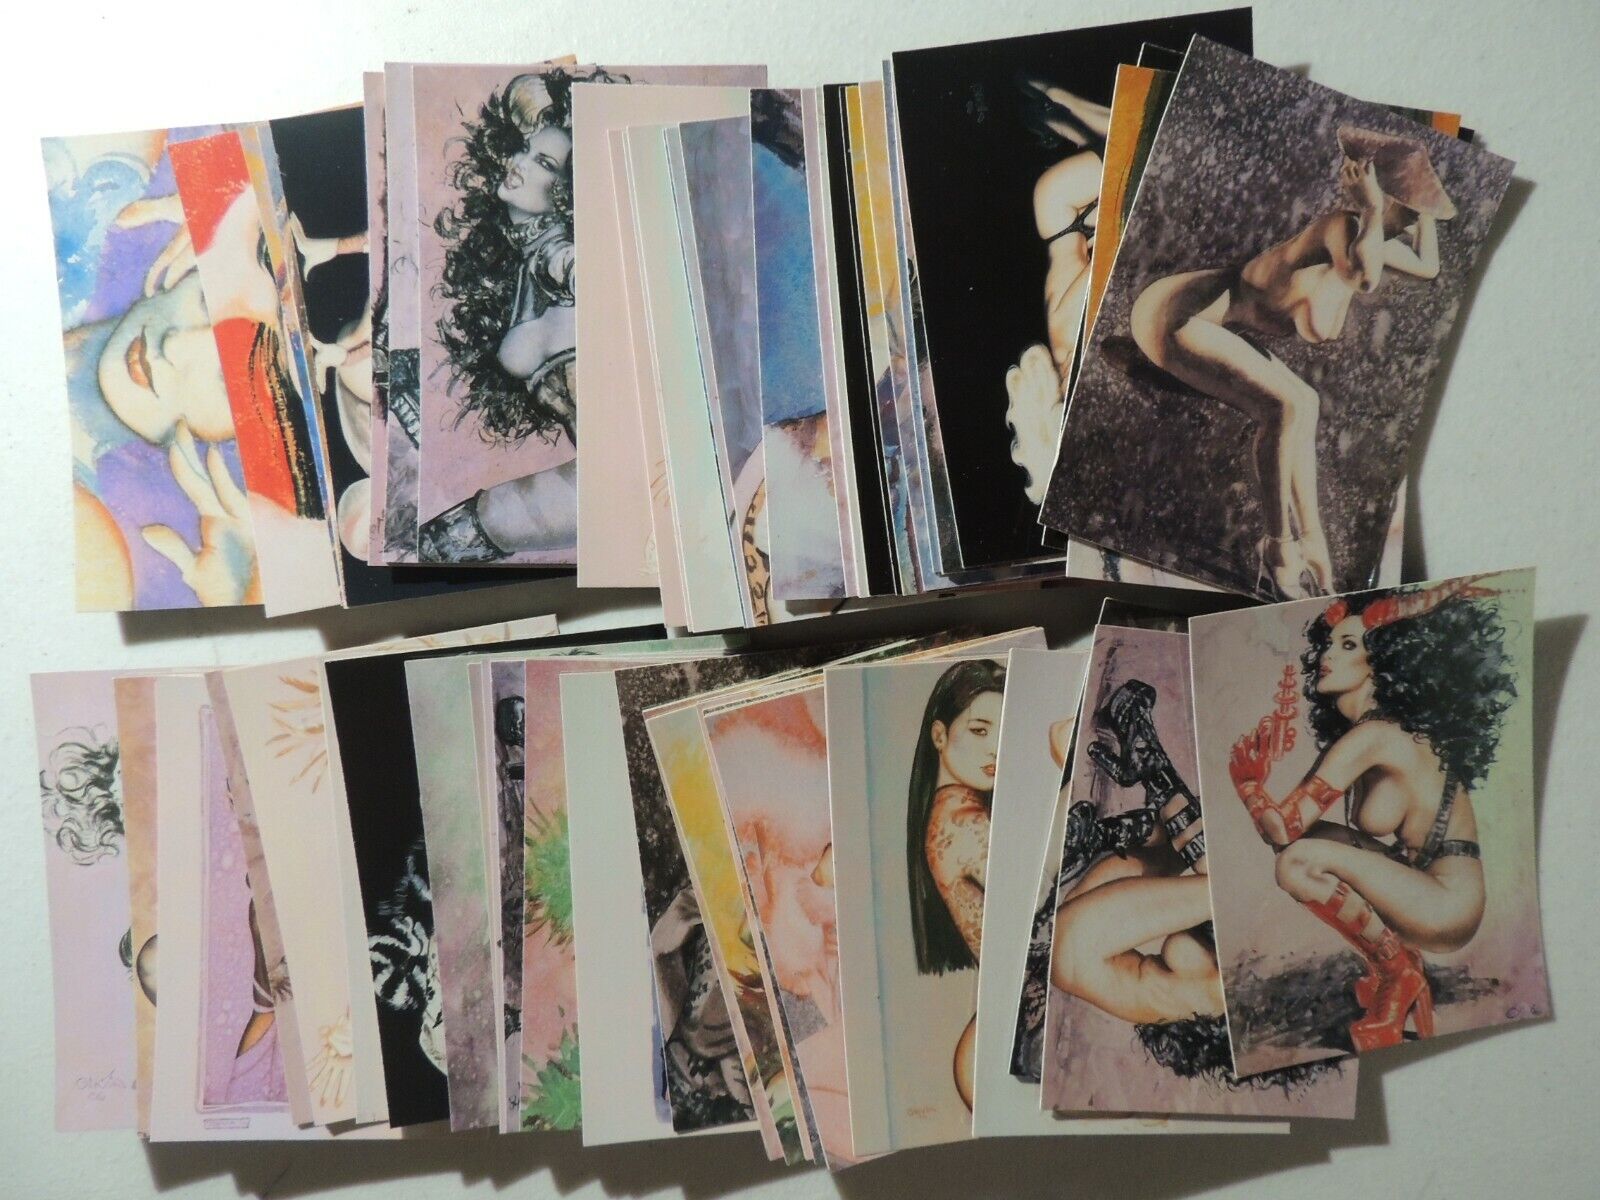 OLIVIA DE BERARDINIS OBSESSIONS IN OMNICHROME SET OF 72 ADULT CARDS COMIC IMAGES